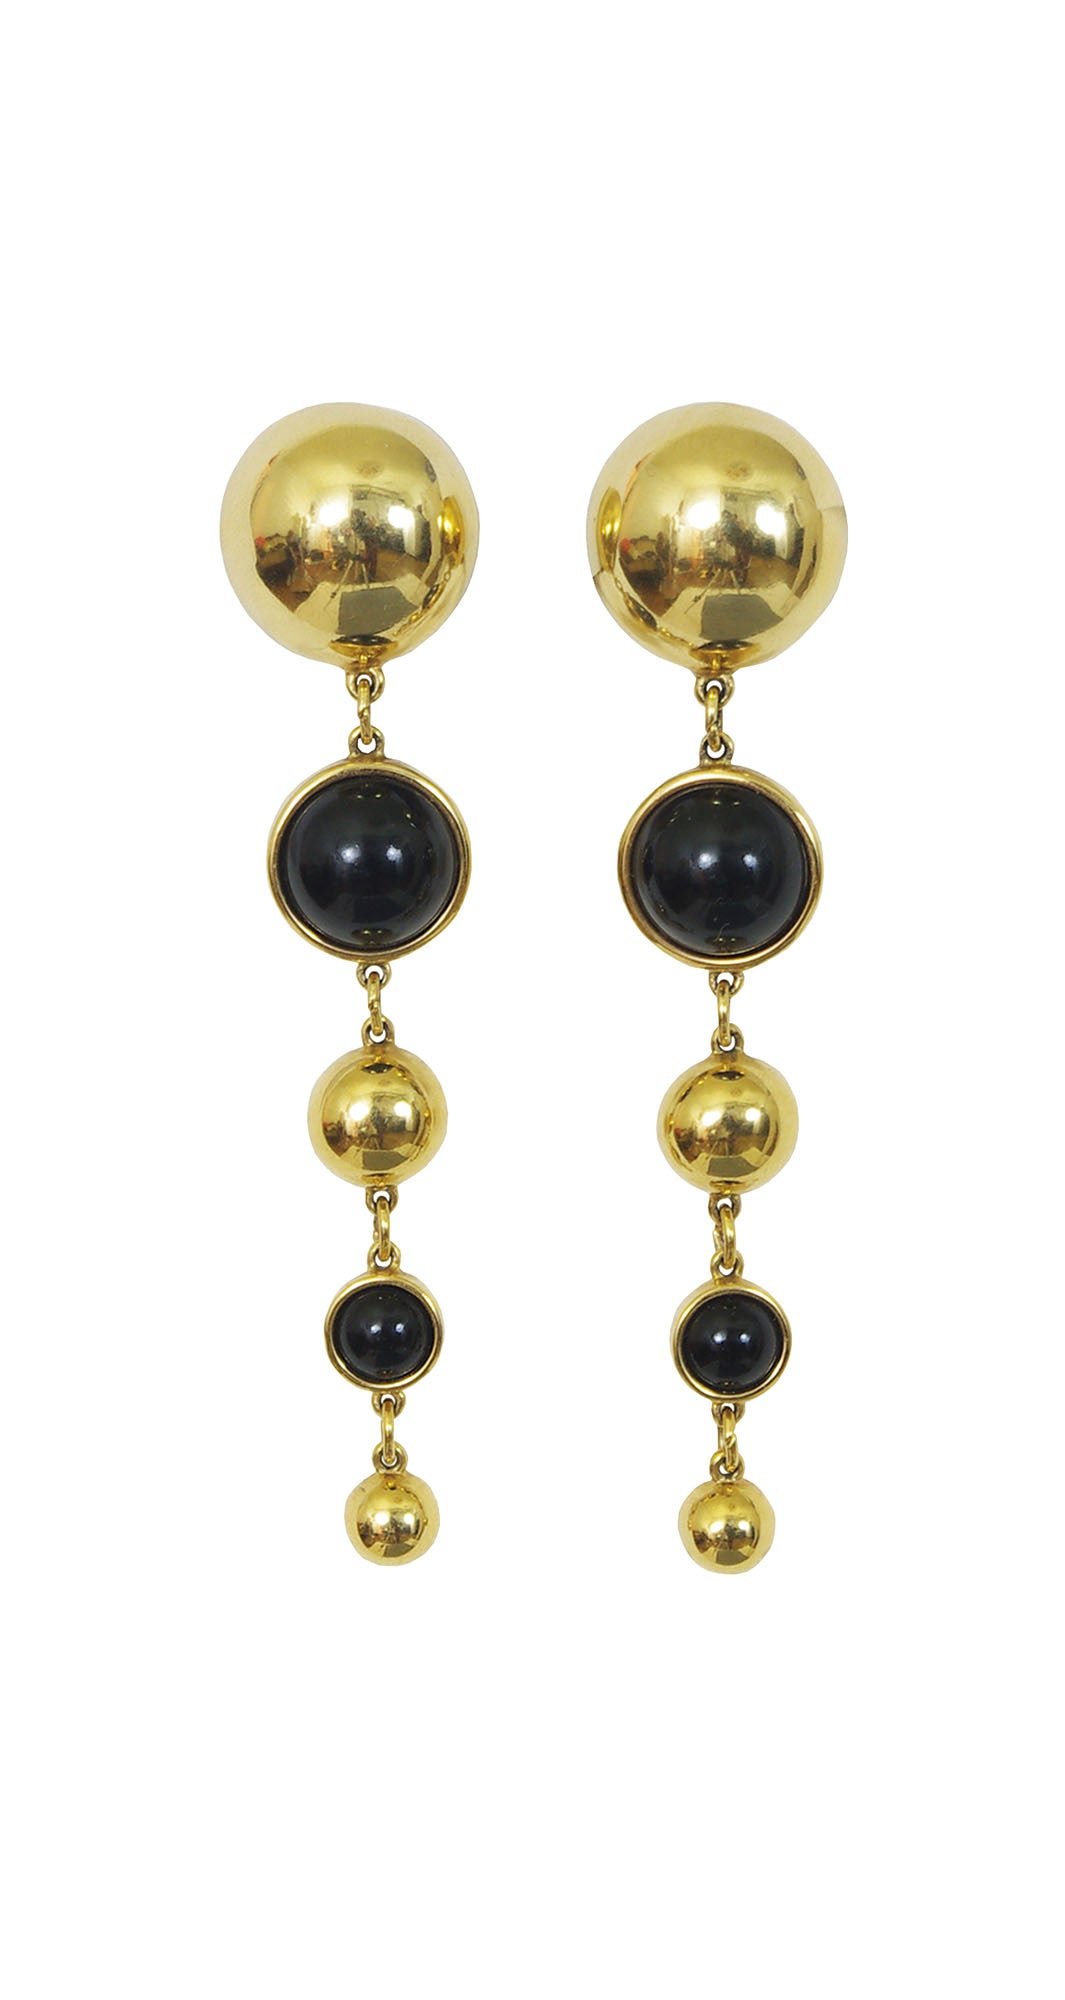 Ultra Mod Gold and Black Clip-On Drop Earrings